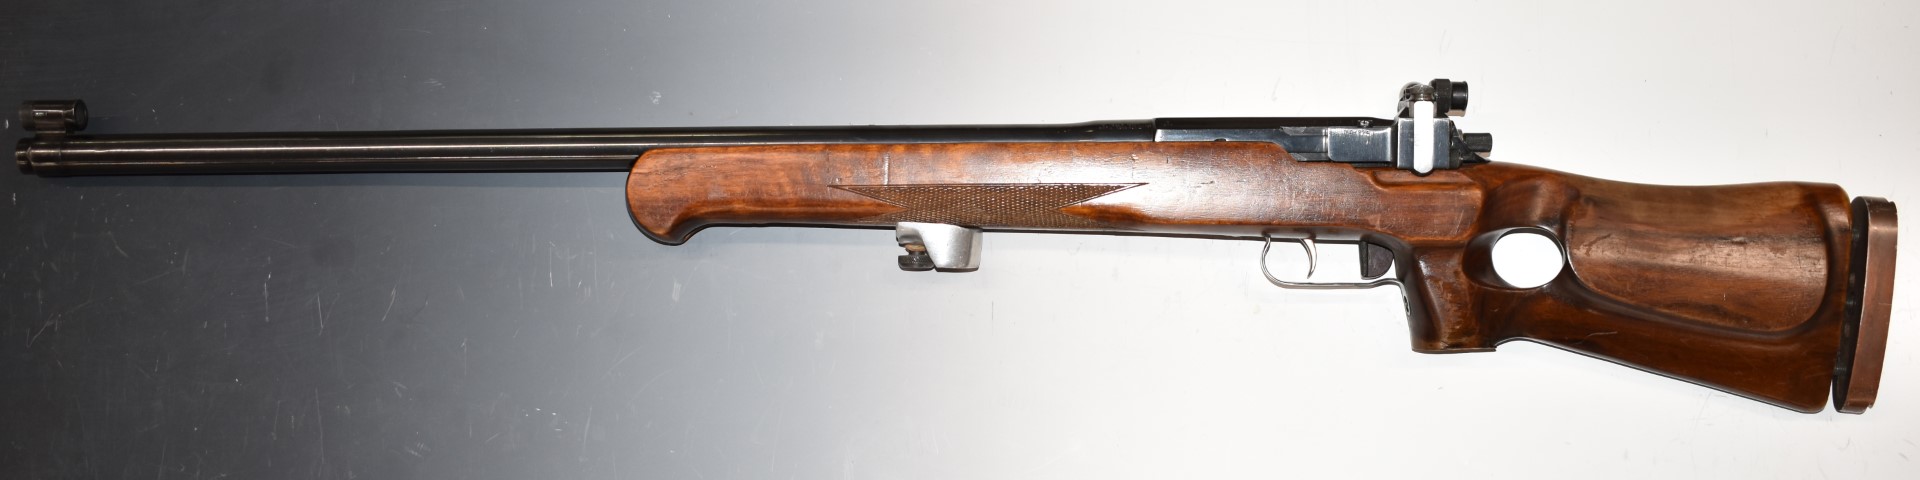 Vostok MU-12 .22 bolt-action target rifle with thumb hole grip, chequered forend, raised cheek - Image 7 of 15